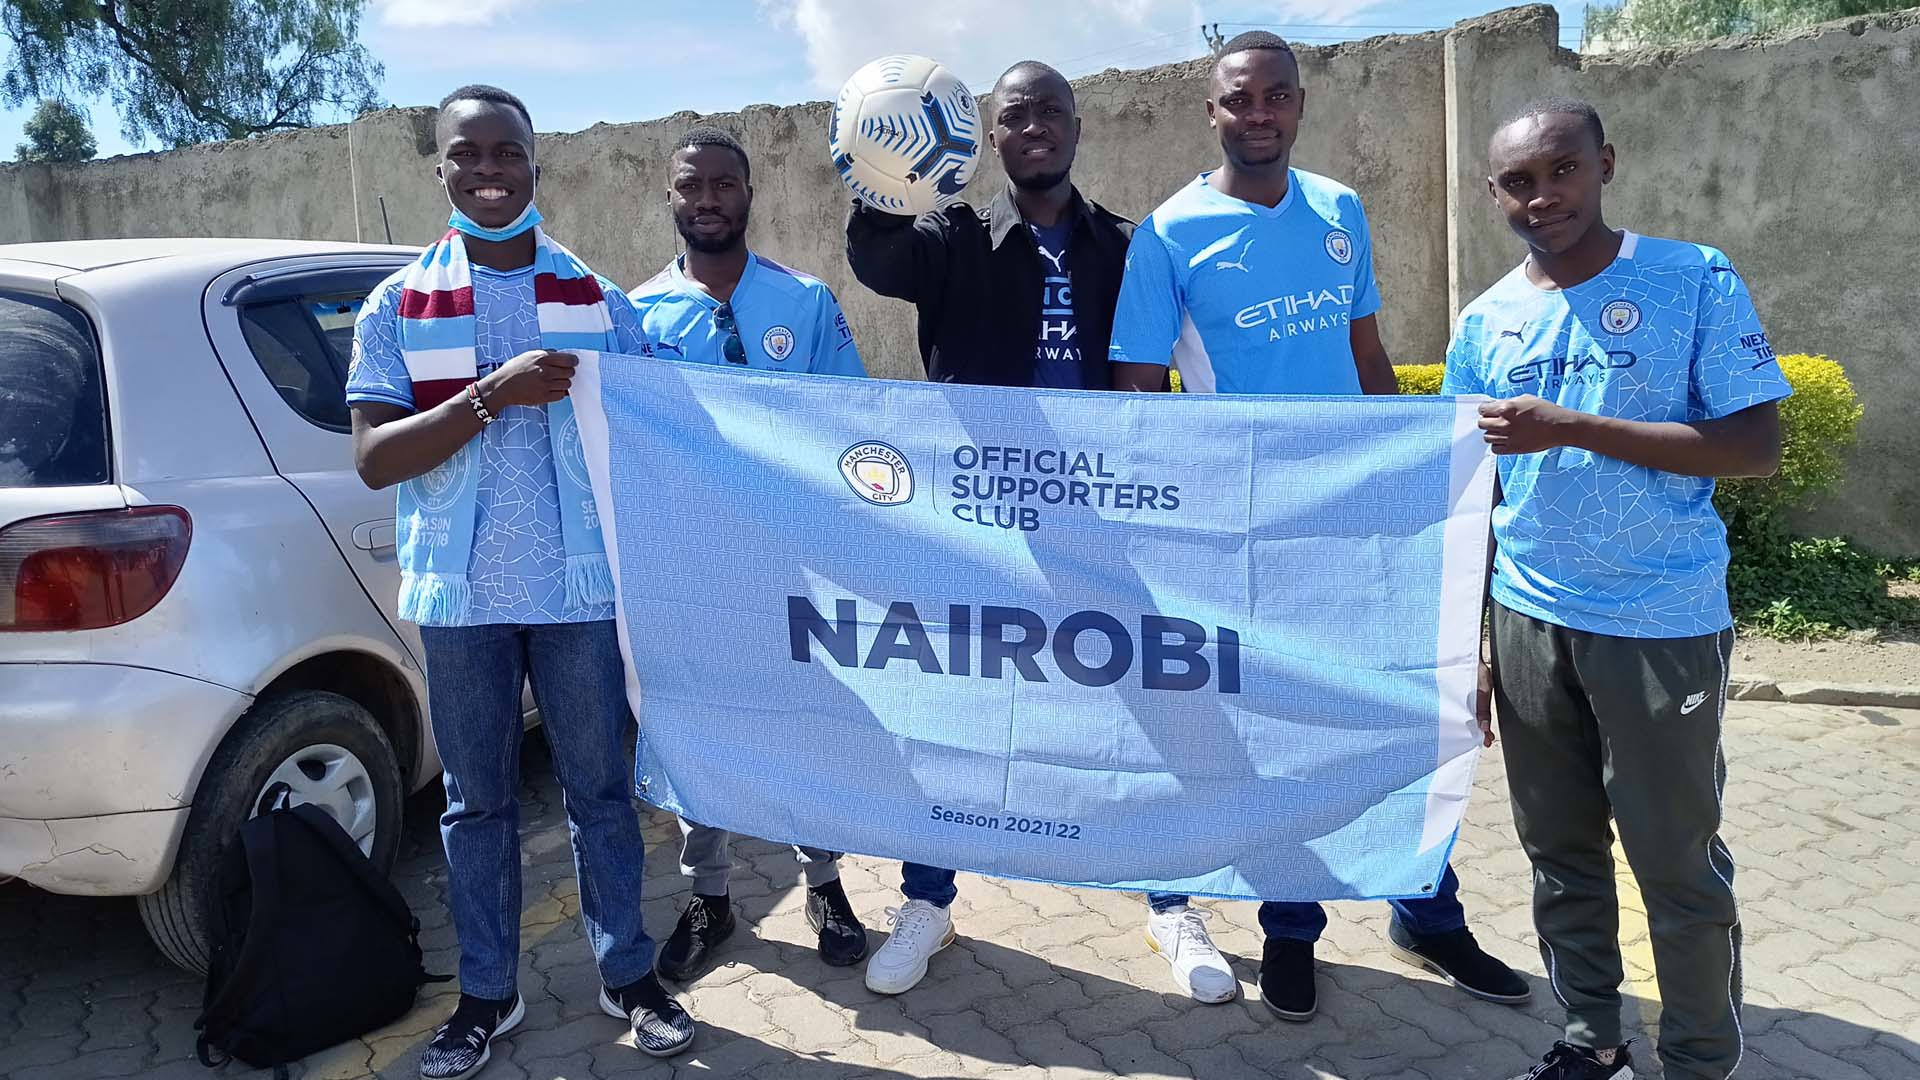 
                        Nairobi Official Supporters Club support local hospital
                